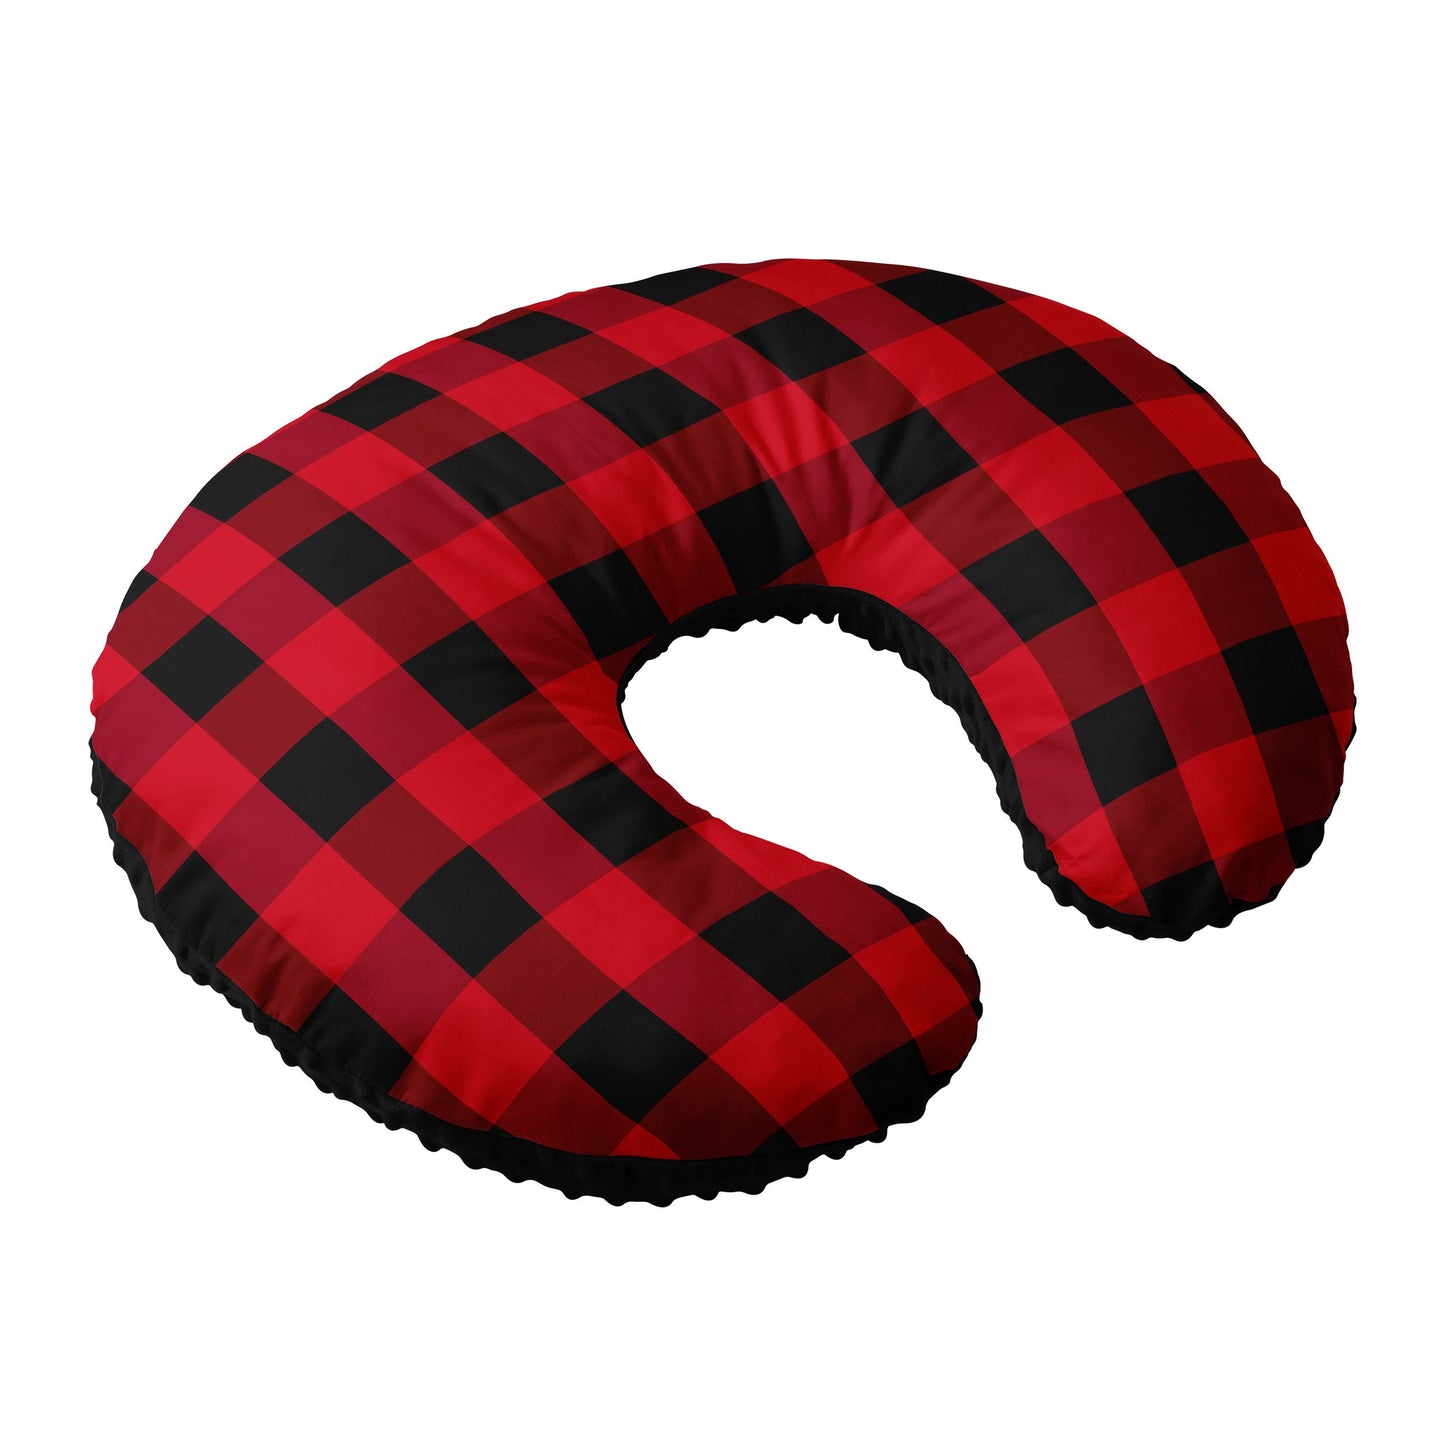 Nursing Pillow Cover,100%Cotton,Slipcover Minky Boy Girl-Woodland Nursery Decor for Baby Boys and Girls Pillow Cover Red Plaid Squares Cabin